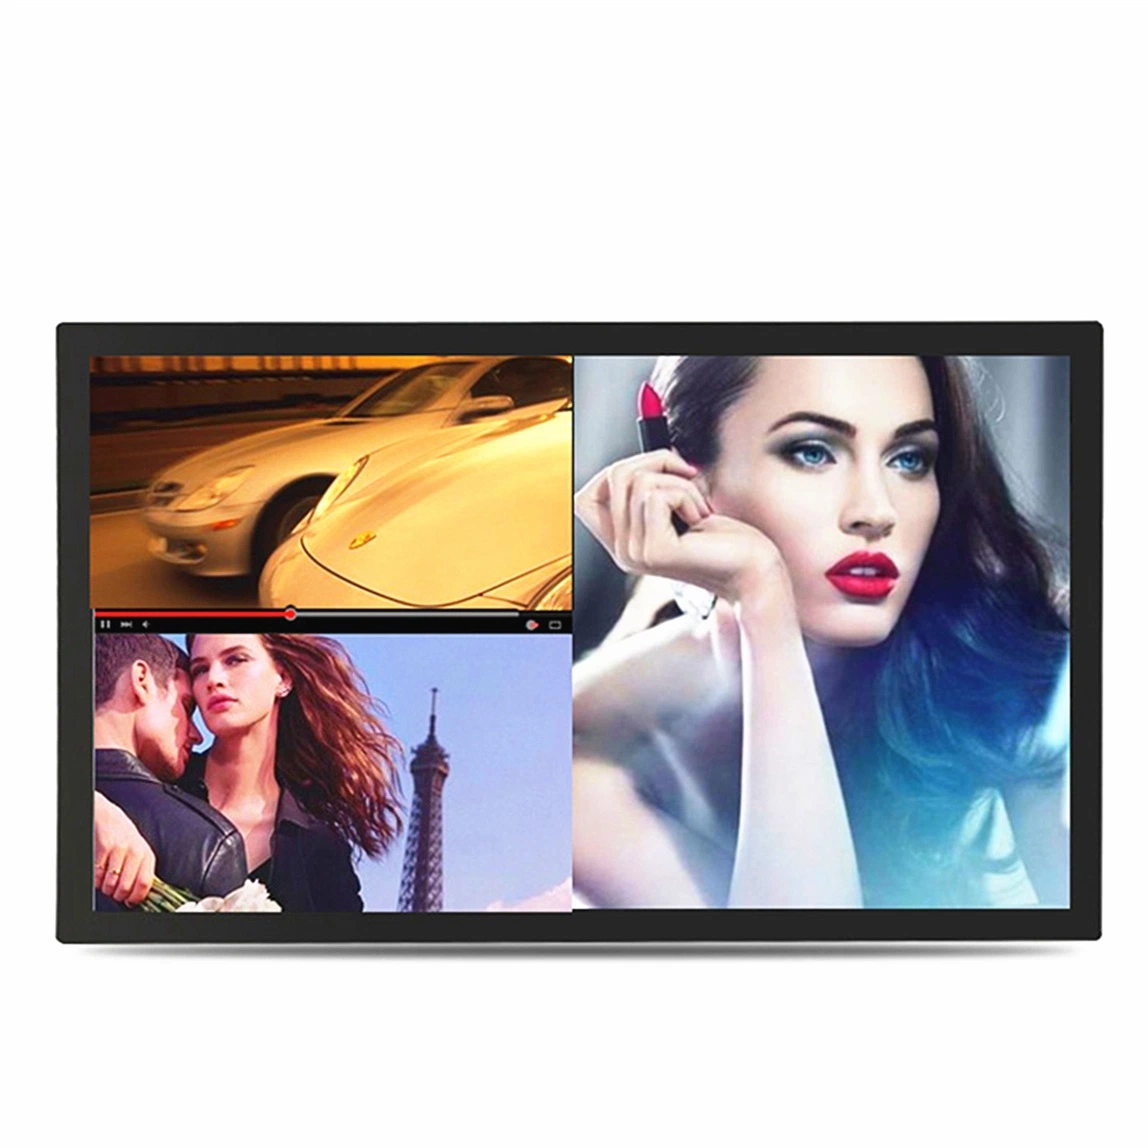 21.5 Inch Wall LCD Online Video Marketing, LCD Digital Signage and Displays TV Advertising Player Digital Signage and Displays Digital Kiosk Digital Ad